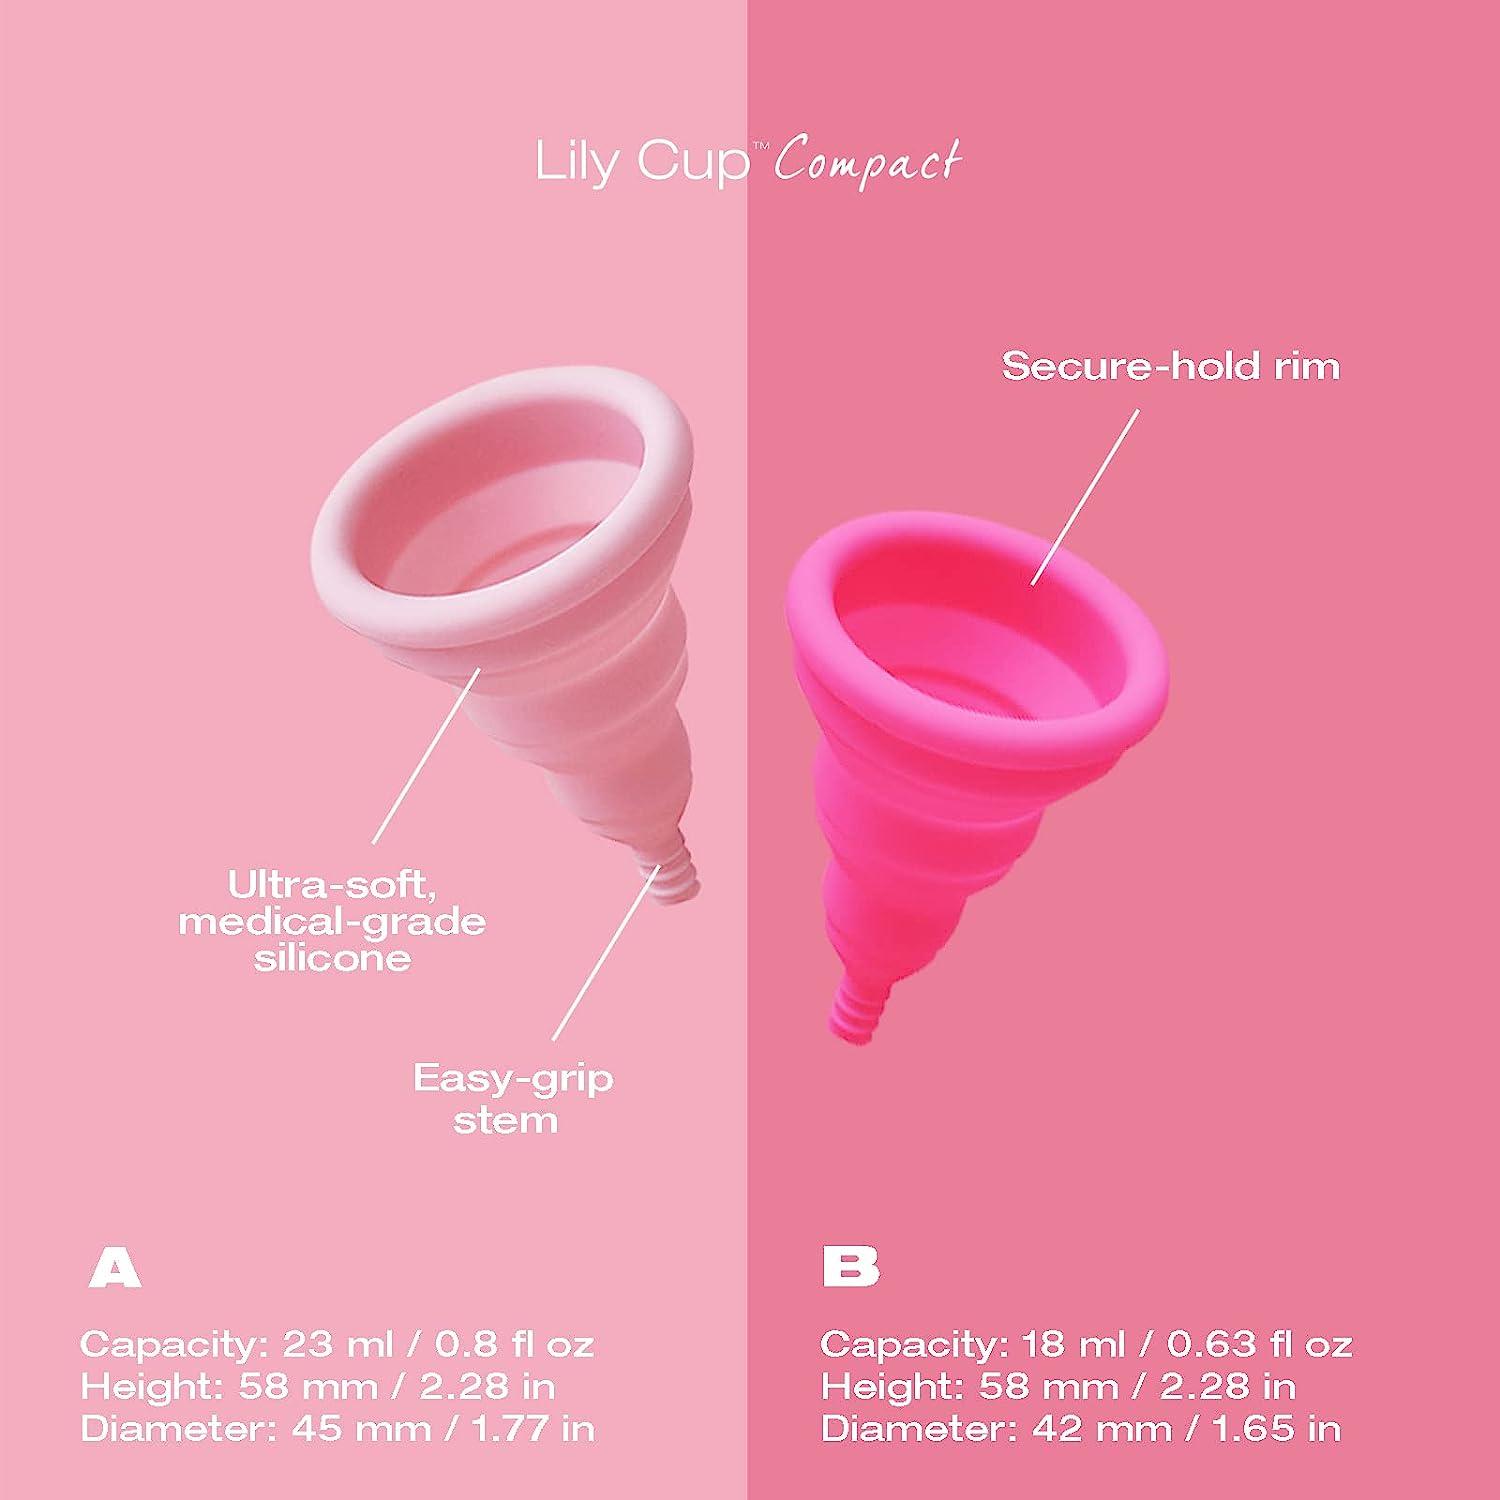 Lily Cup - Menstrual Cup –